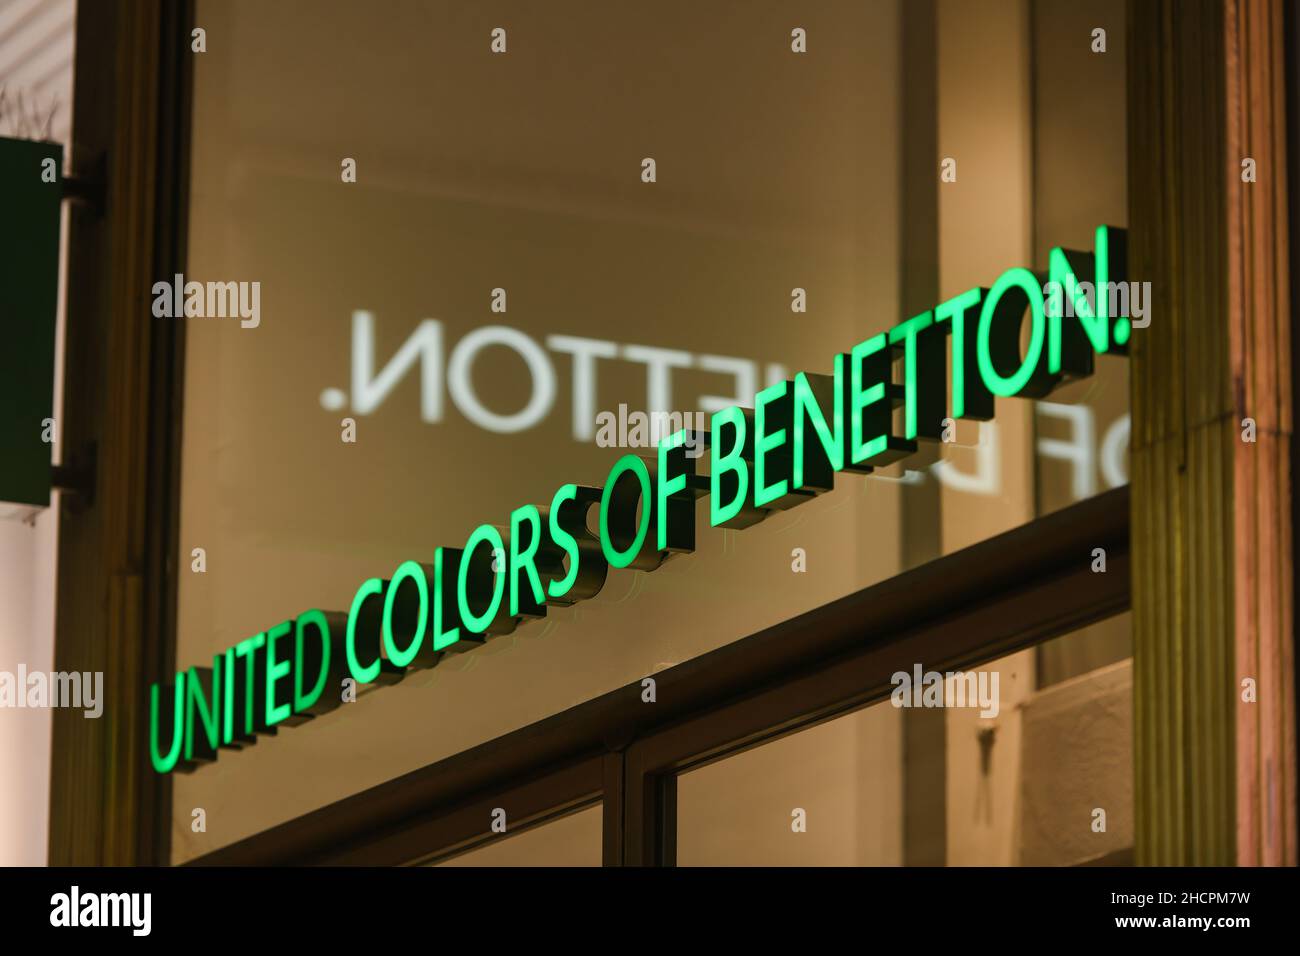 Milan, Italy - September 24, 2021: United Colors of Benetton logo displayed  on a facade of a store in Milan Stock Photo - Alamy